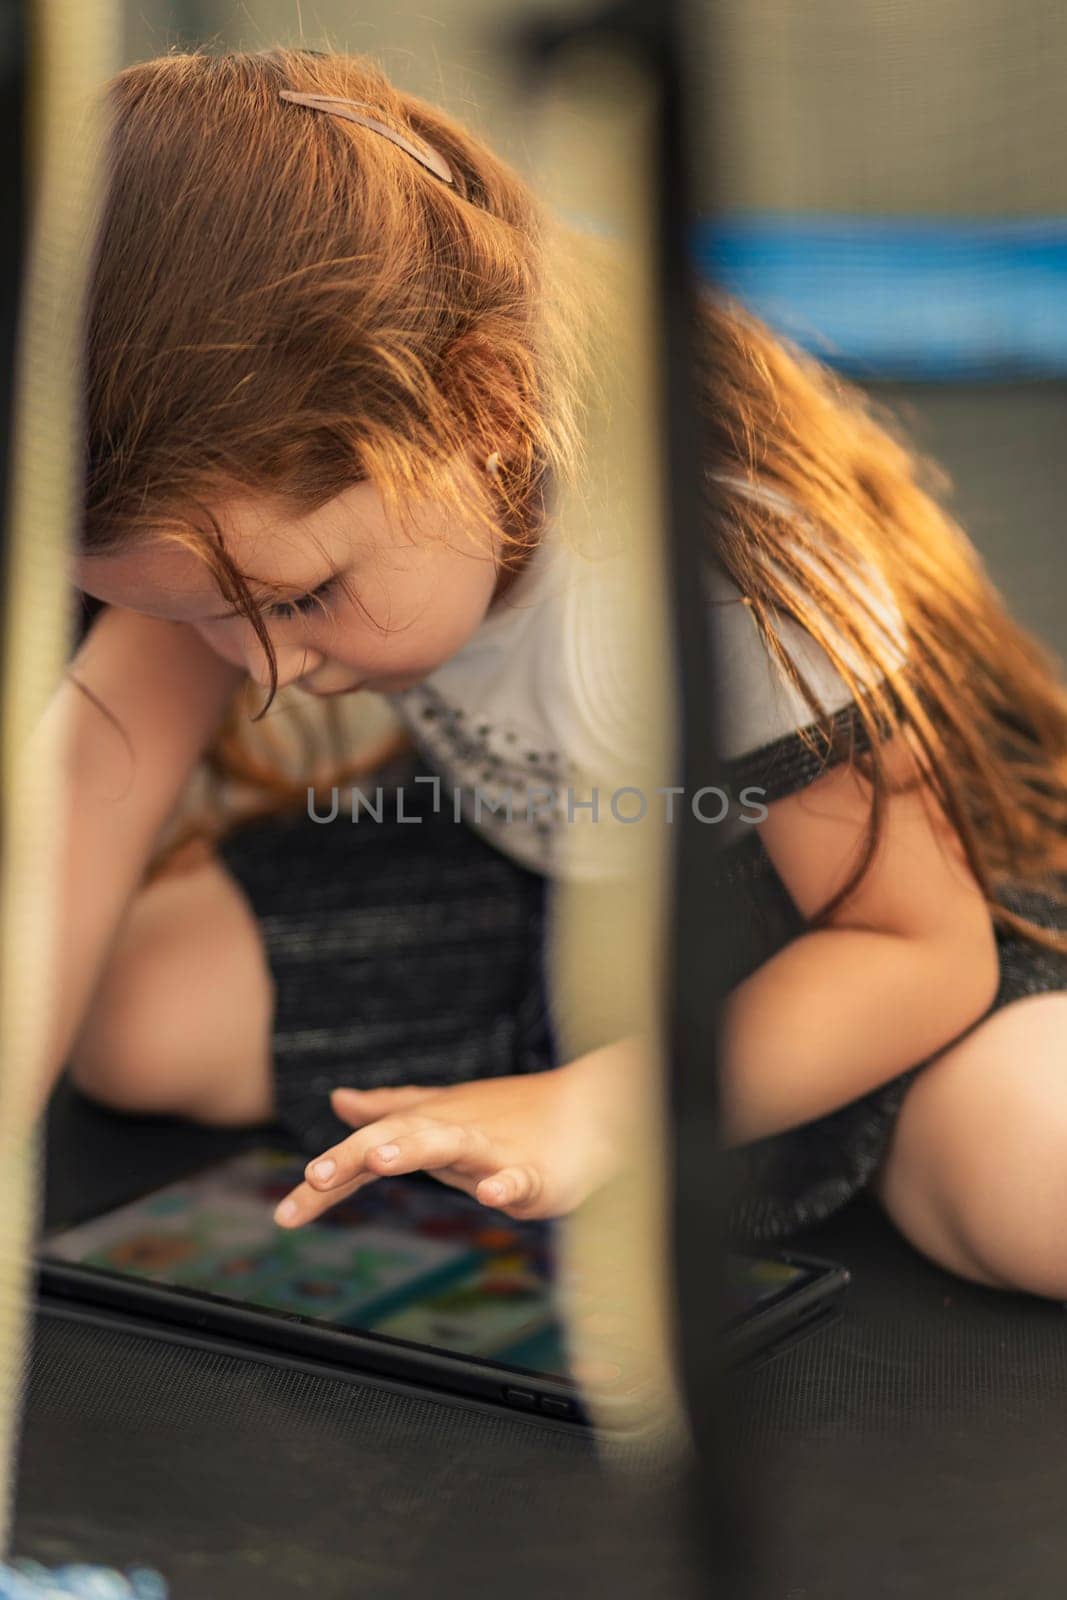 little girl sits on a trampoline and plays on a tablet